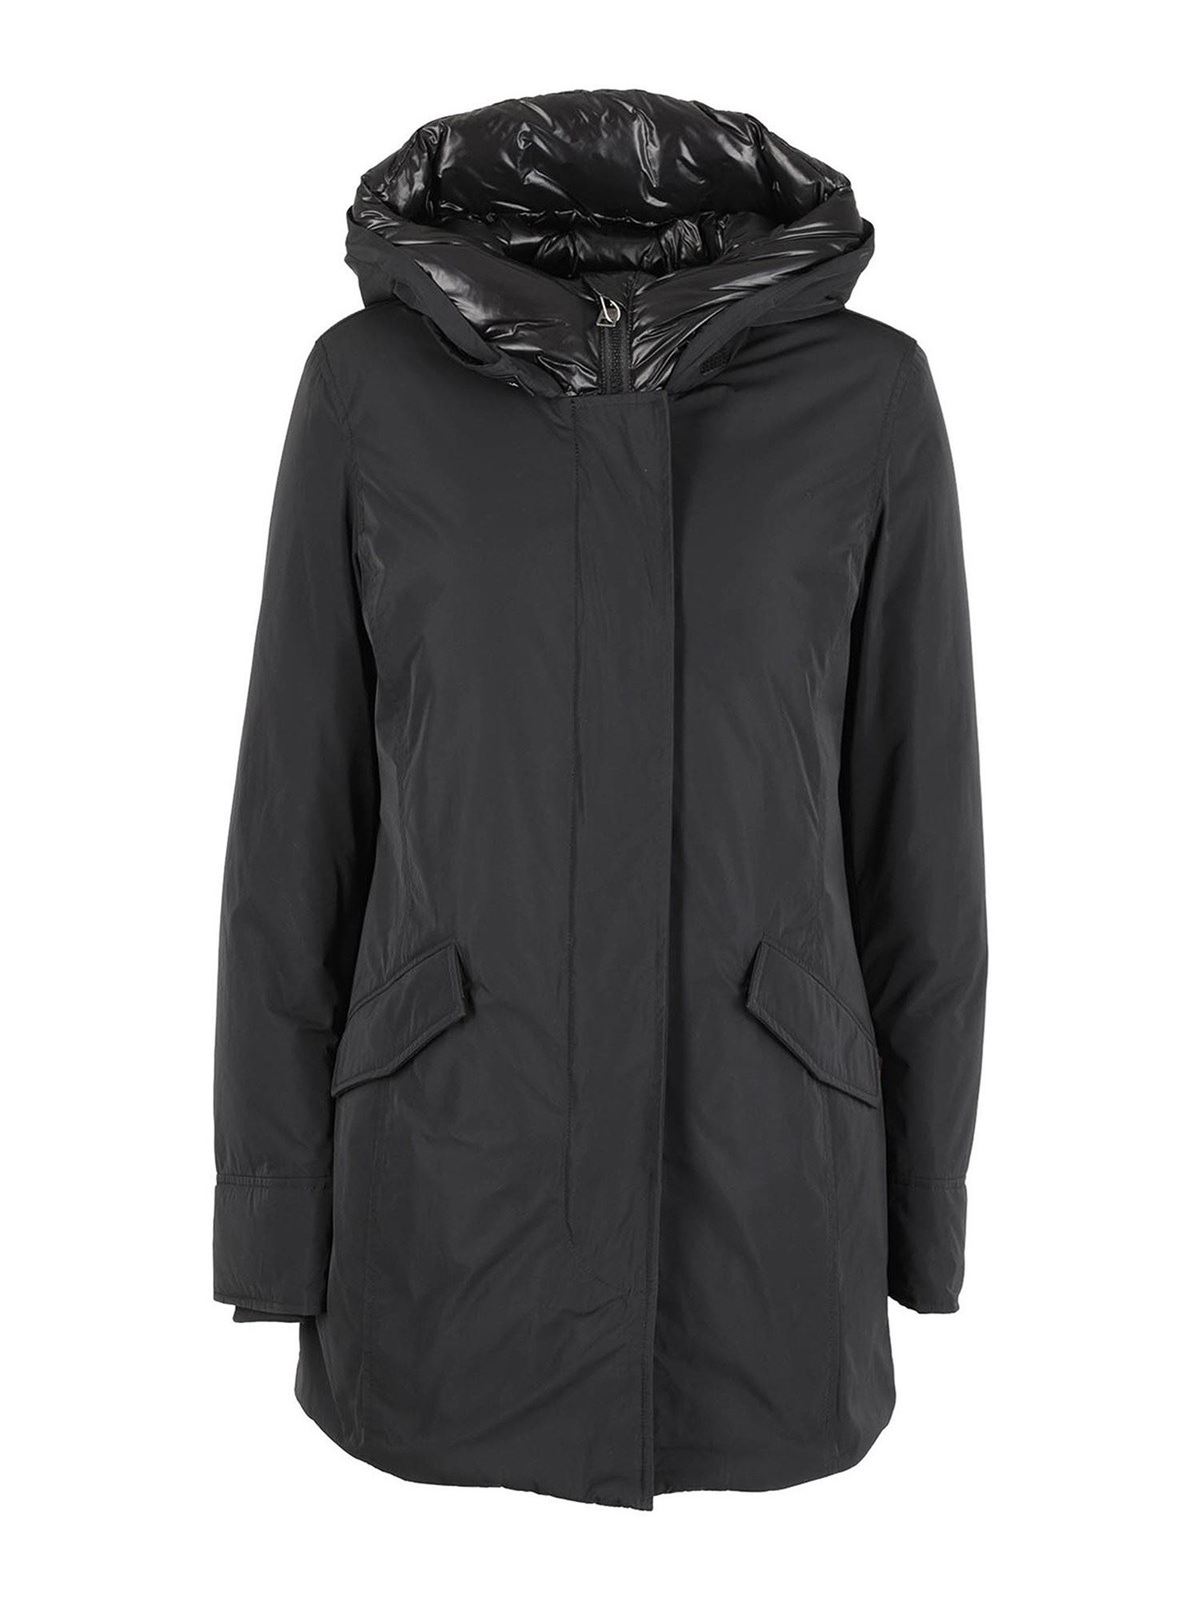 Woolrich - Luxury Arctic parka in black - padded coats ...